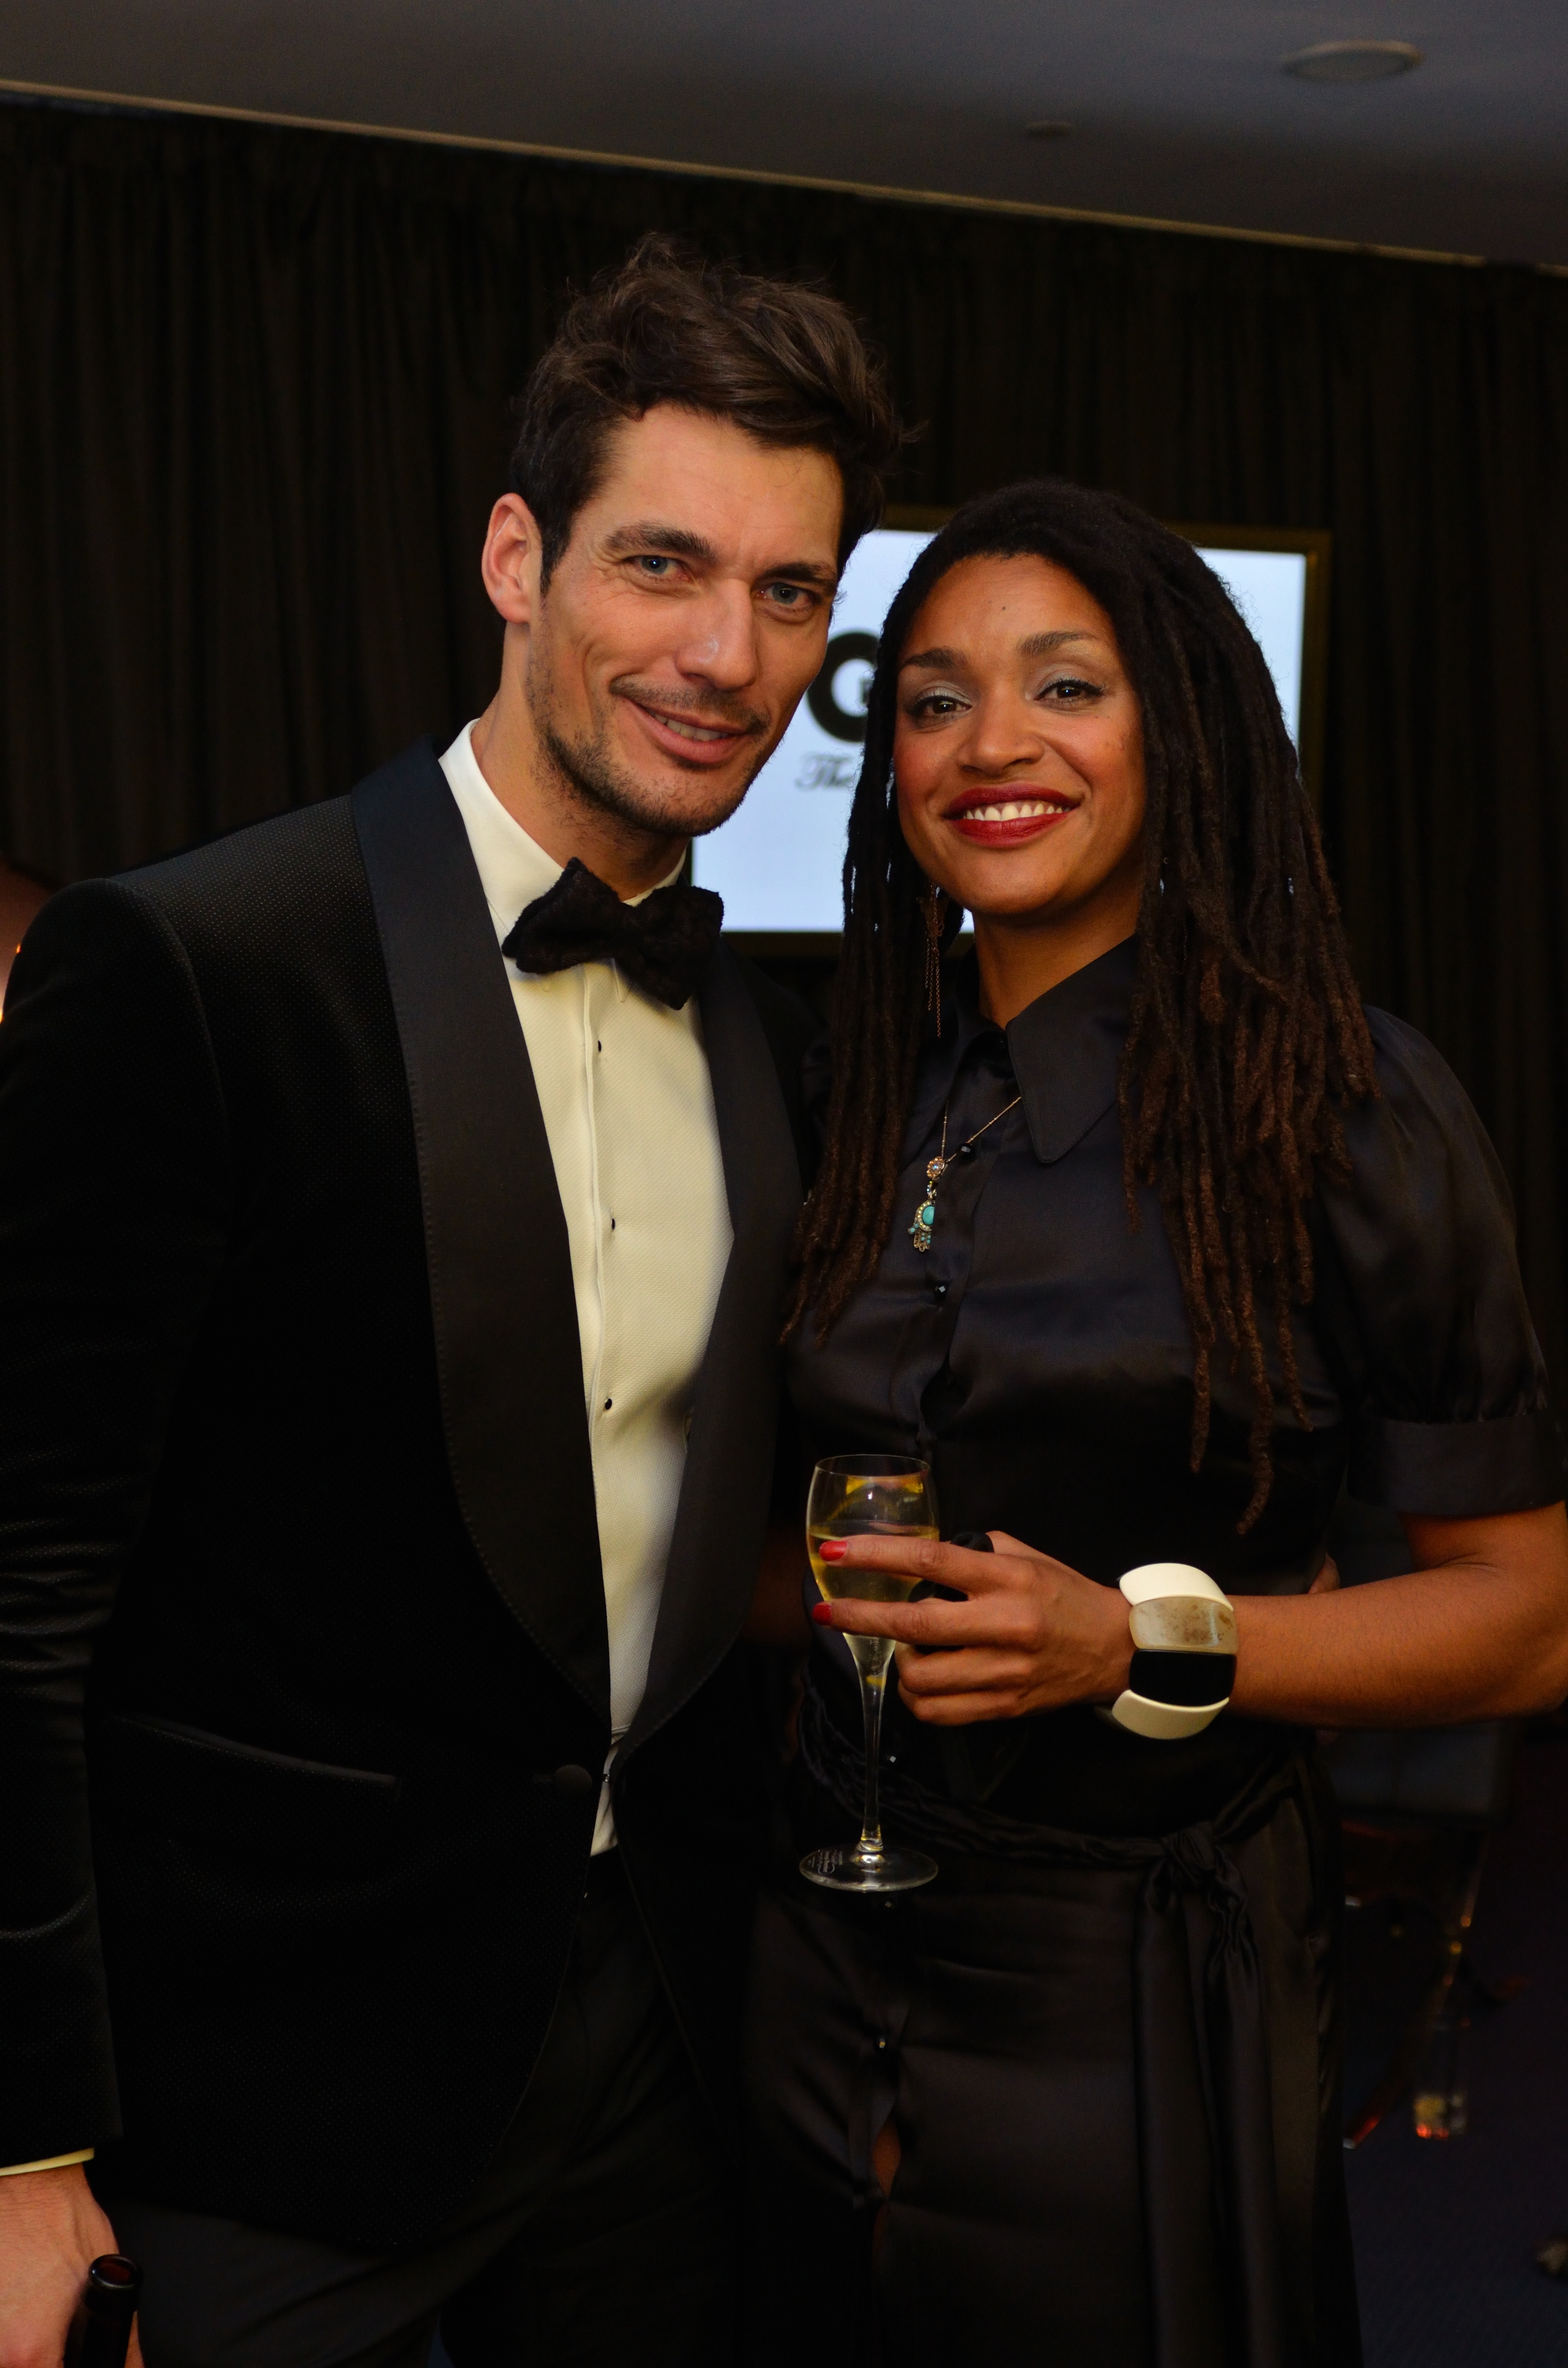 Kerri photographed with David Gandy at The GQ Man of the Year Awards.